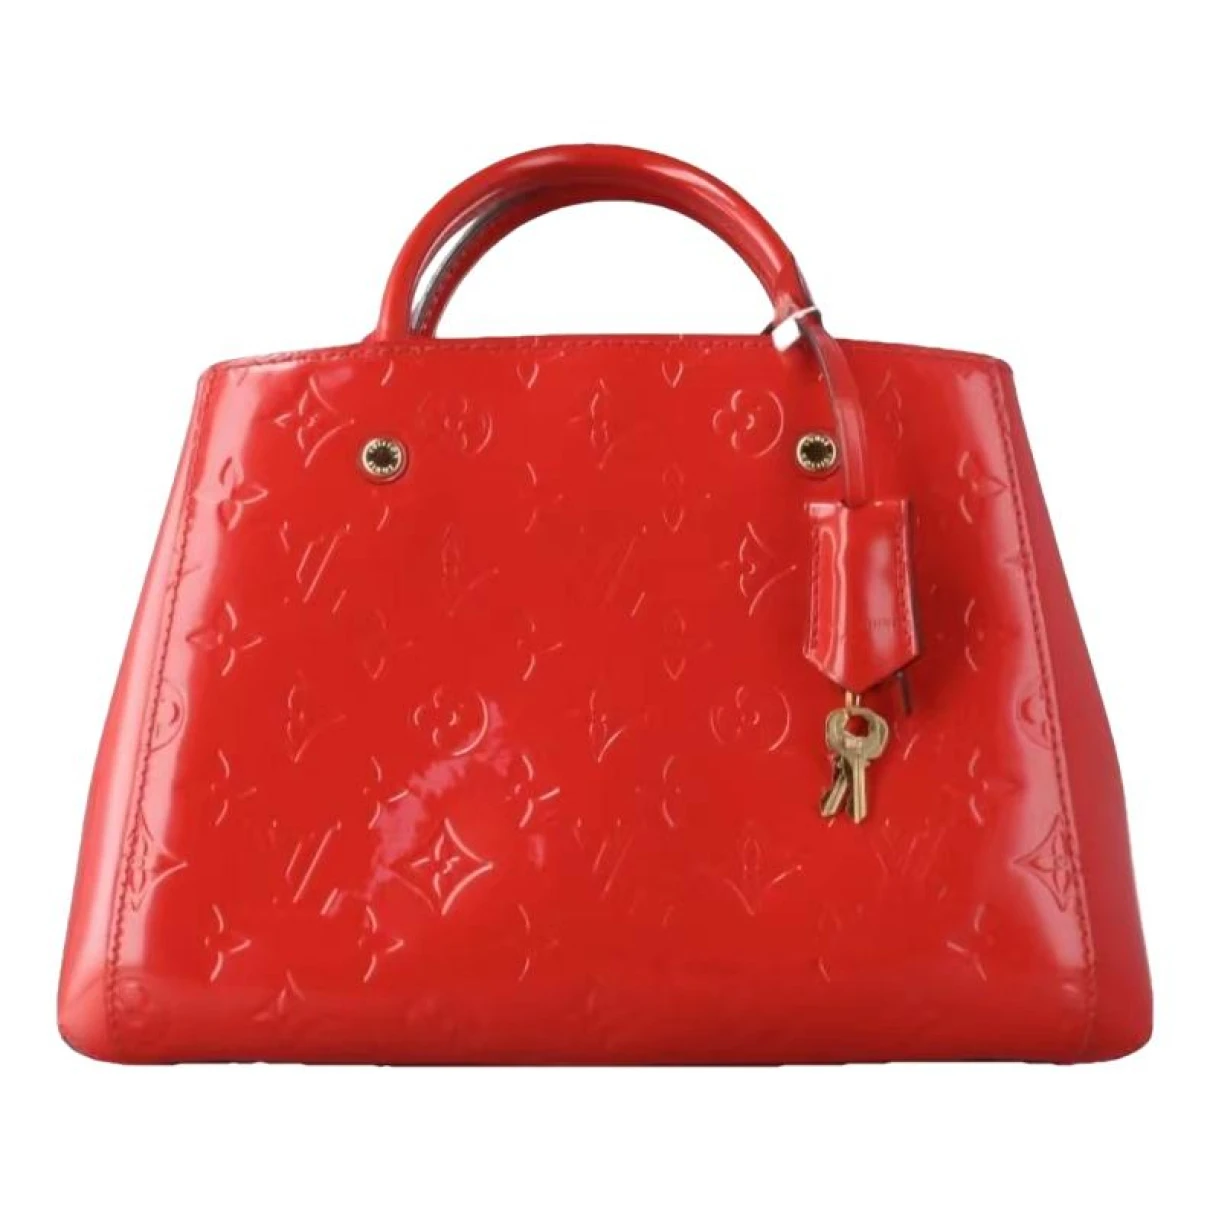 Pre-owned Louis Vuitton Montaigne Patent Leather Handbag In Red